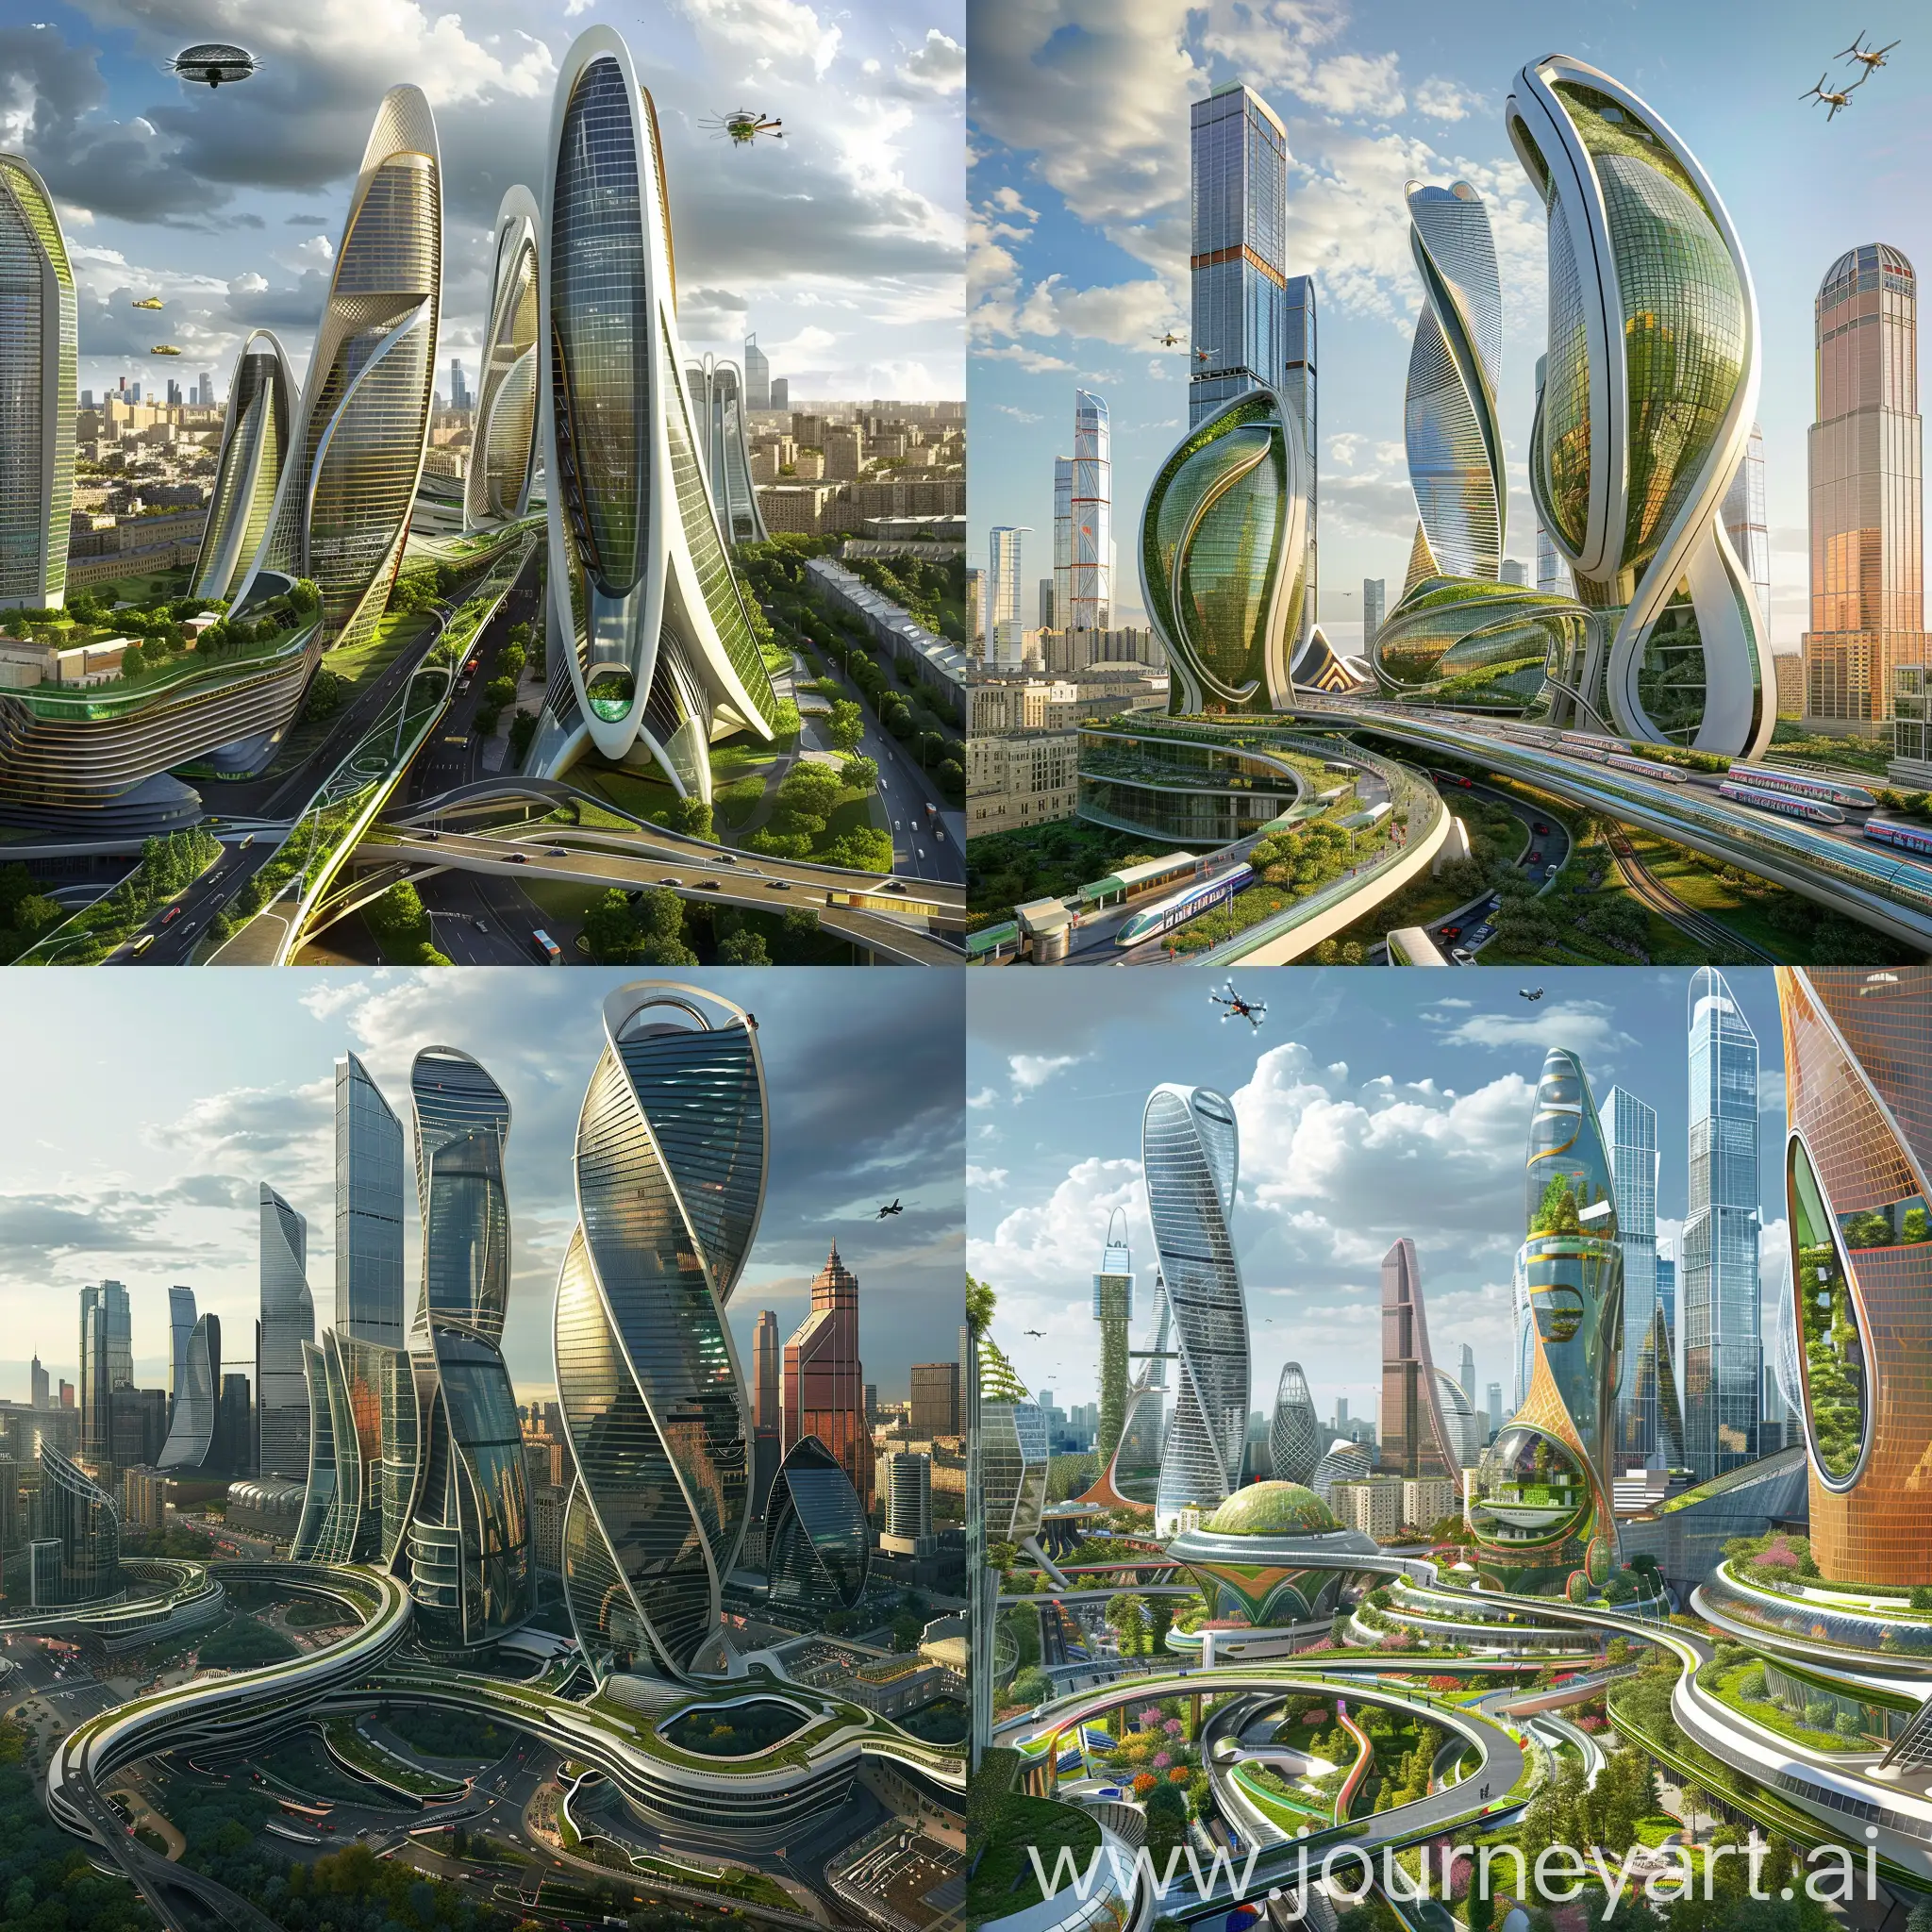 Futuristic Moscow, Dynamic Skyscrapers, Integrated Transportation Hubs, Smart Green Spaces, Augmented Reality Zones, Energy-Generating Pavements, Modular Housing Units, Automated Waste Management, Interactive Public Art, Youth Innovation Labs, Security Drones, Interactive Facades, High-Speed Transit Systems, Drone Delivery Networks, Vertical Gardens, Holographic Signage, Renewable Energy Arrays, Smart Lighting Systems, Youth Sports Complexes, Public Transport Pods, Architectural Robotics, in futurism style, in unreal engine 5 style --stylize 1000